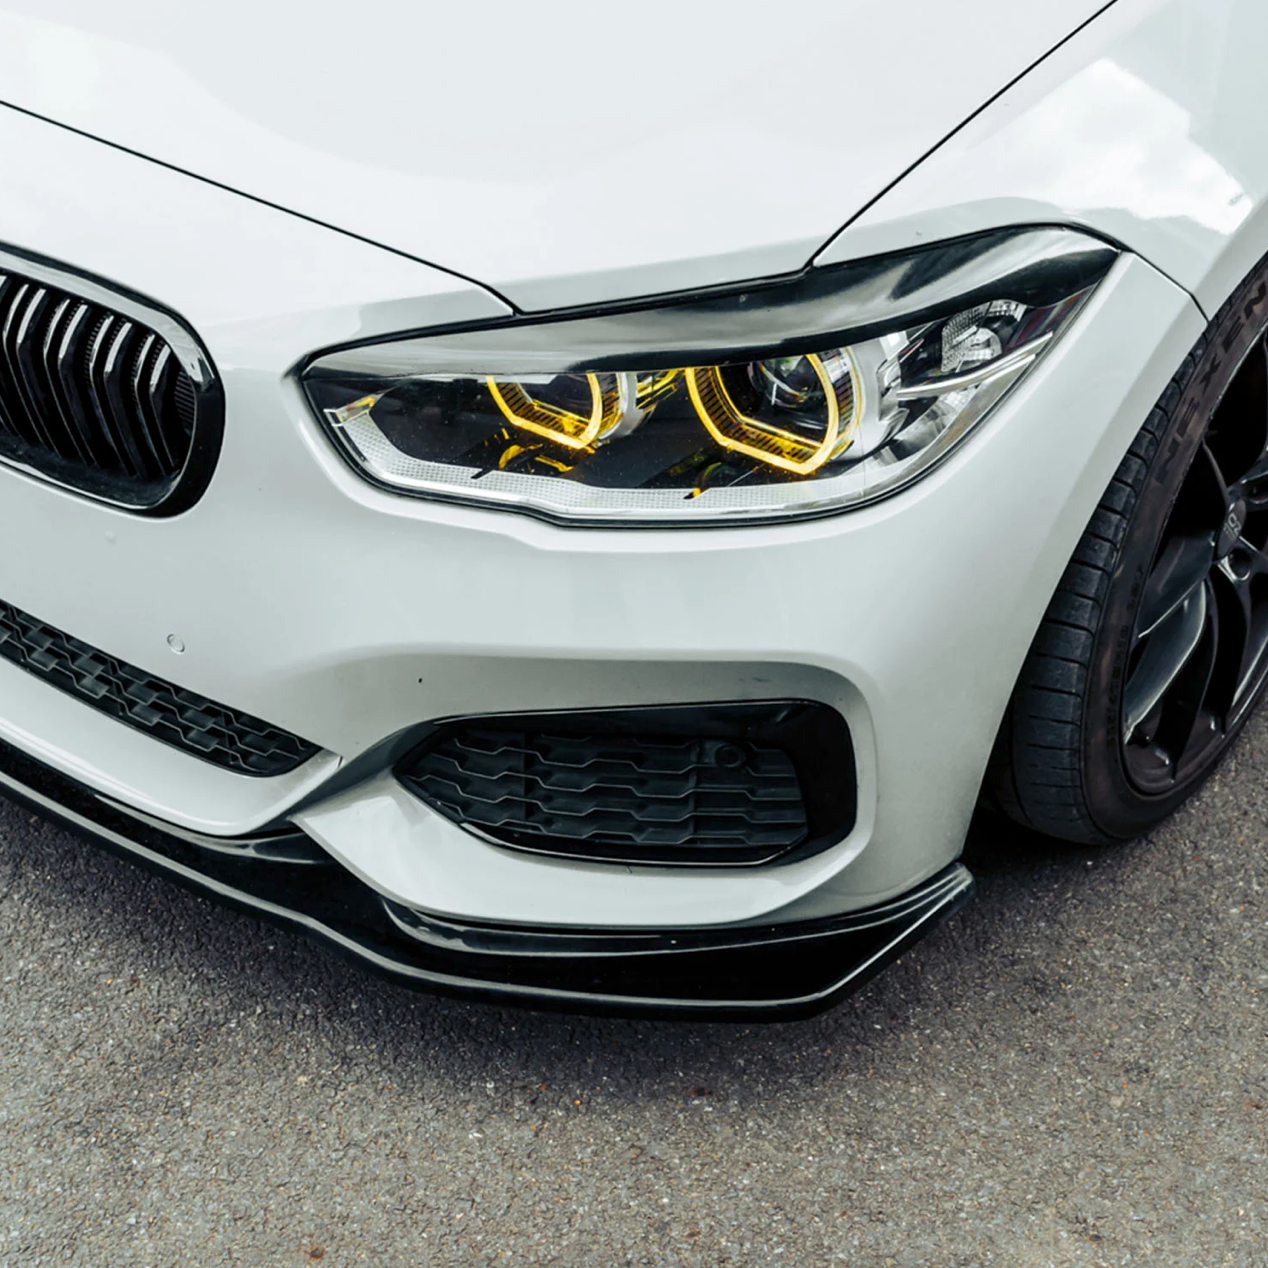 LEDs for BMW Serie 1 (F20 F21) - 2011 - 2019